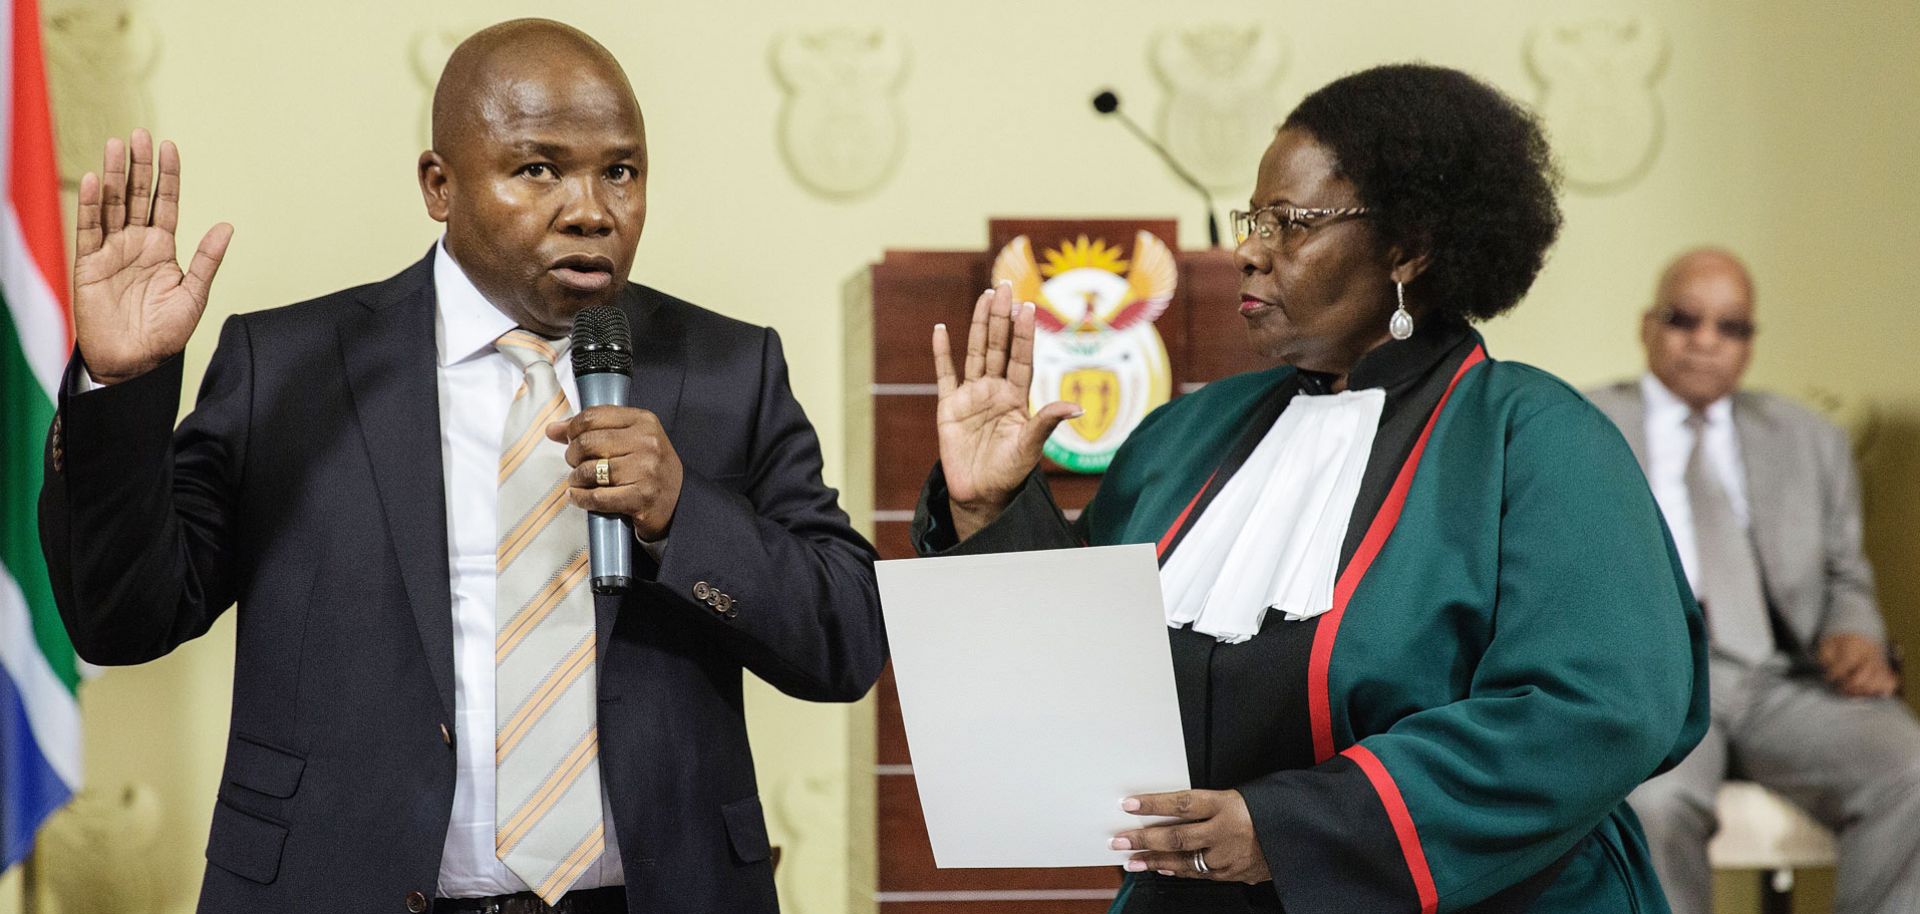 David Des van Rooyen (L) is sworn as the new South African Finance Minister by Justice Minister Sisi Khampepe on Dec. 10.